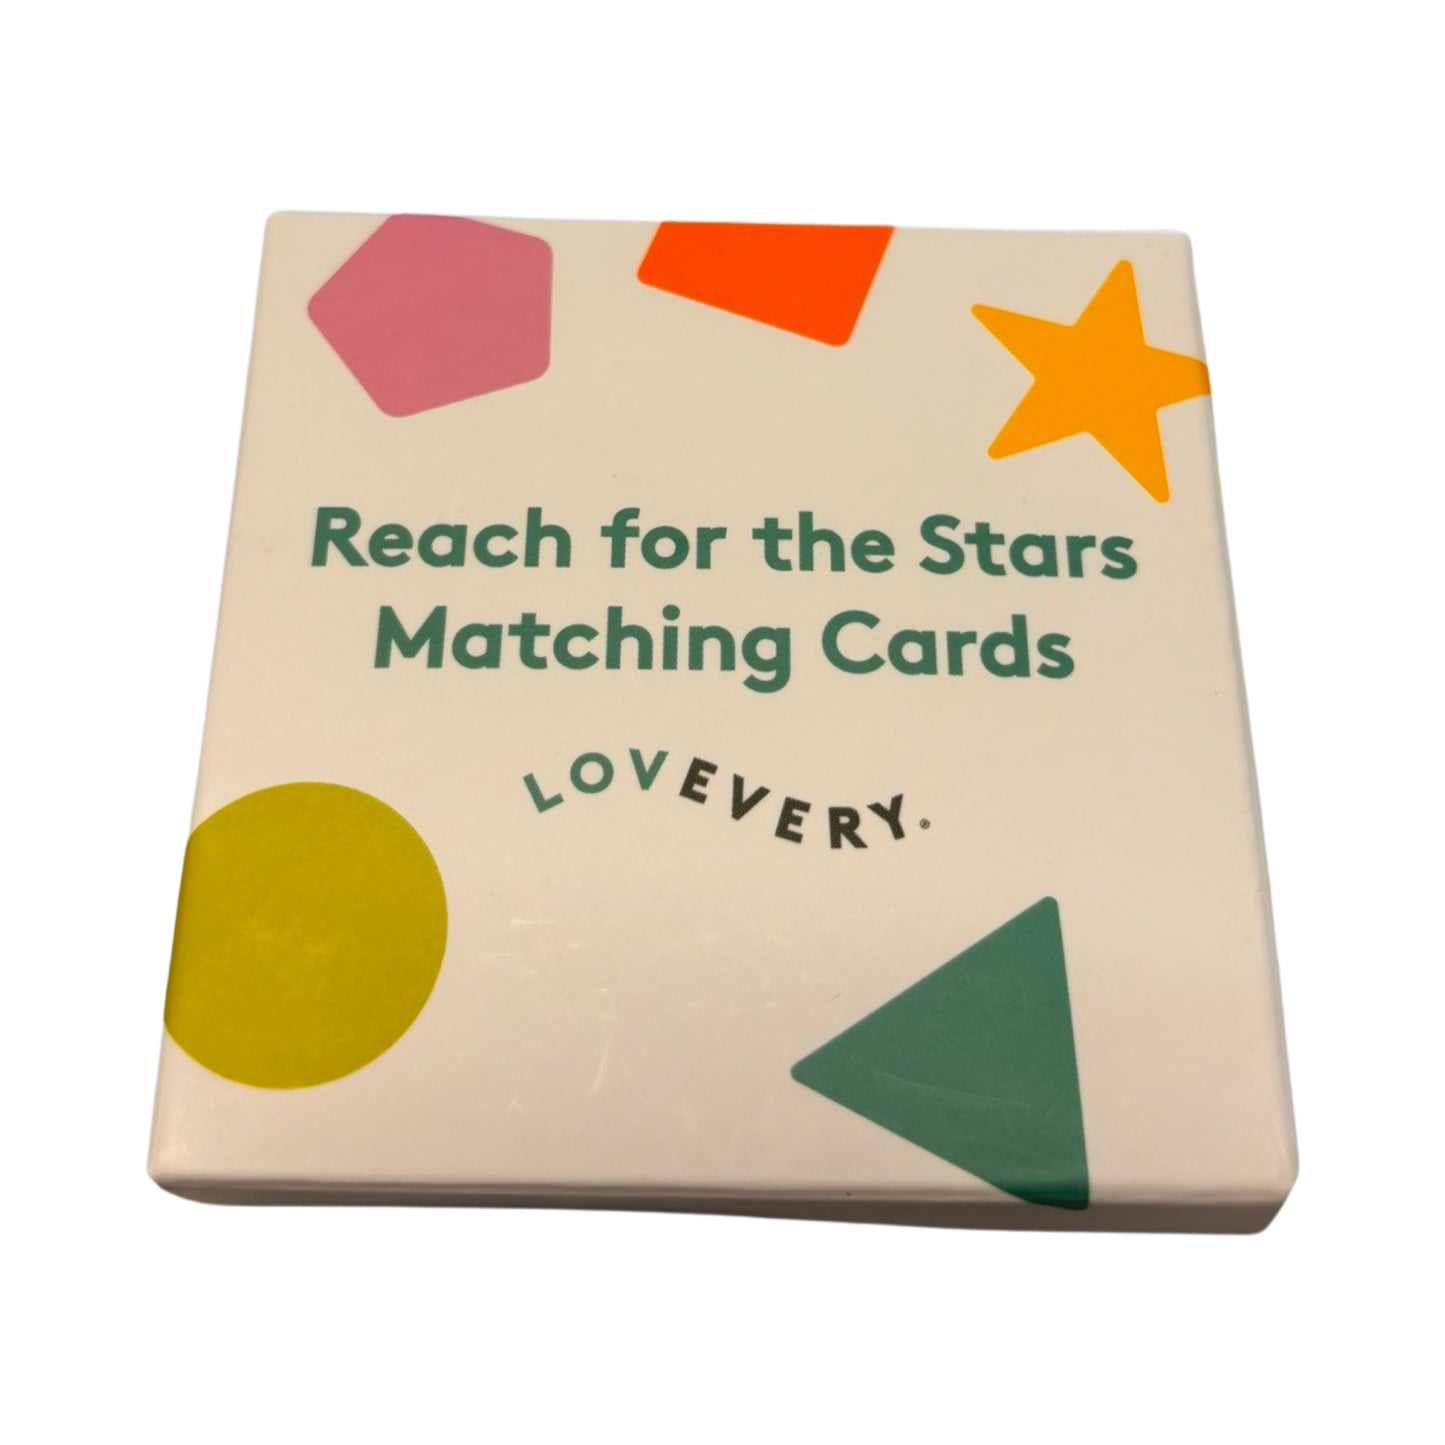 Lovevery Reach for the Stars Cards